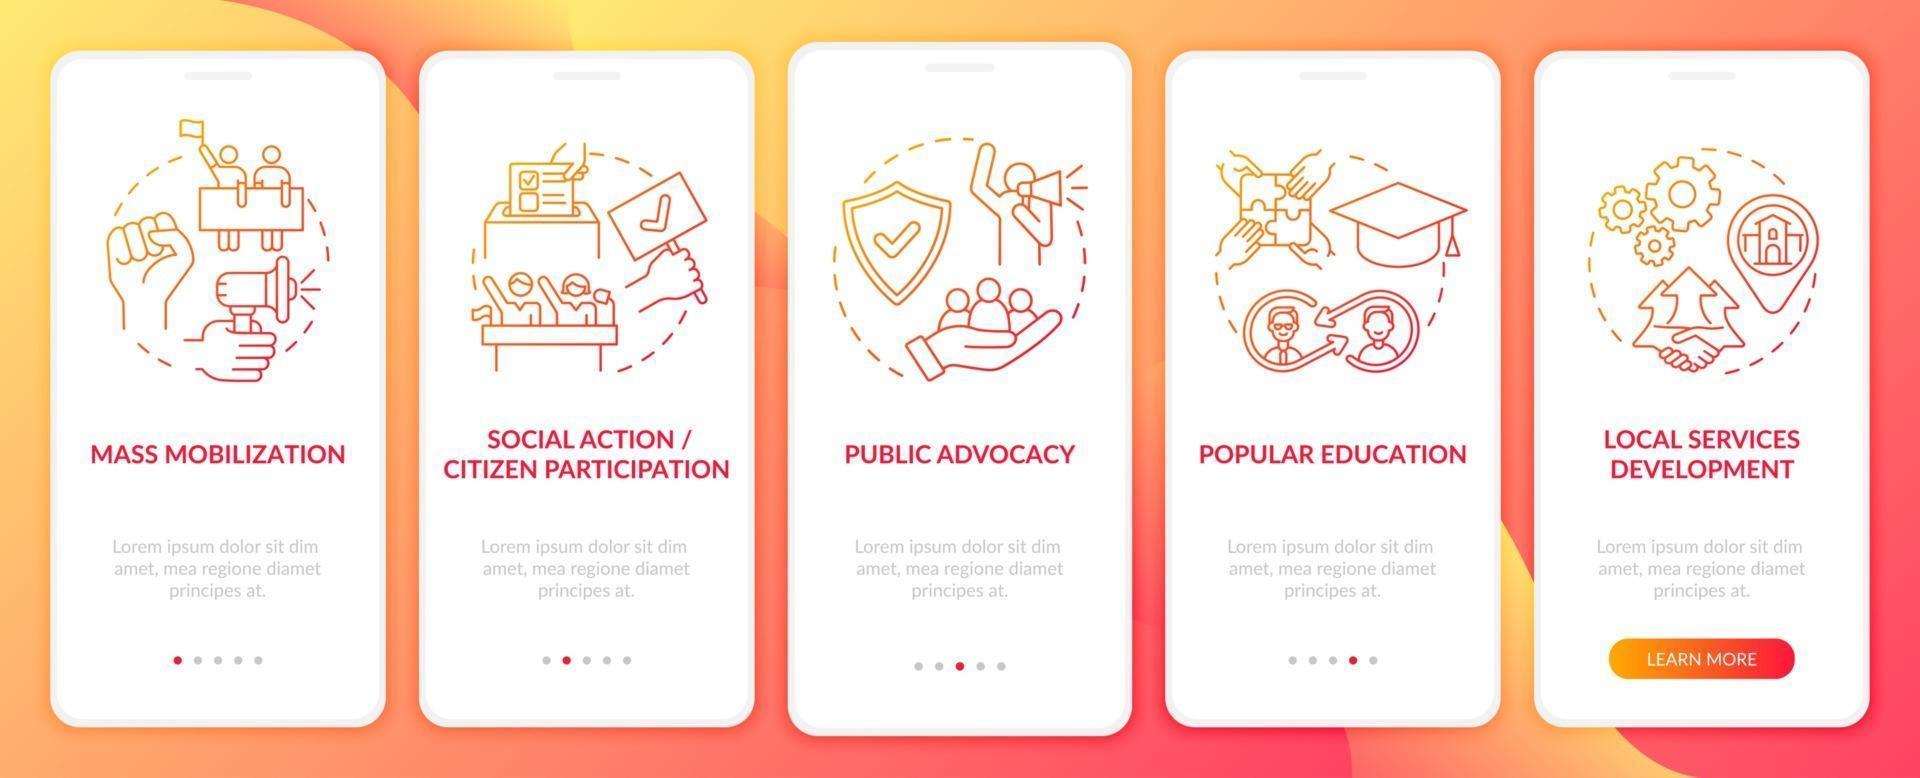 Population change strategies onboarding mobile app page screen with concepts. Public advocacy walkthrough 5 steps graphic instructions. UI, UX, GUI vector template with linear color illustrations